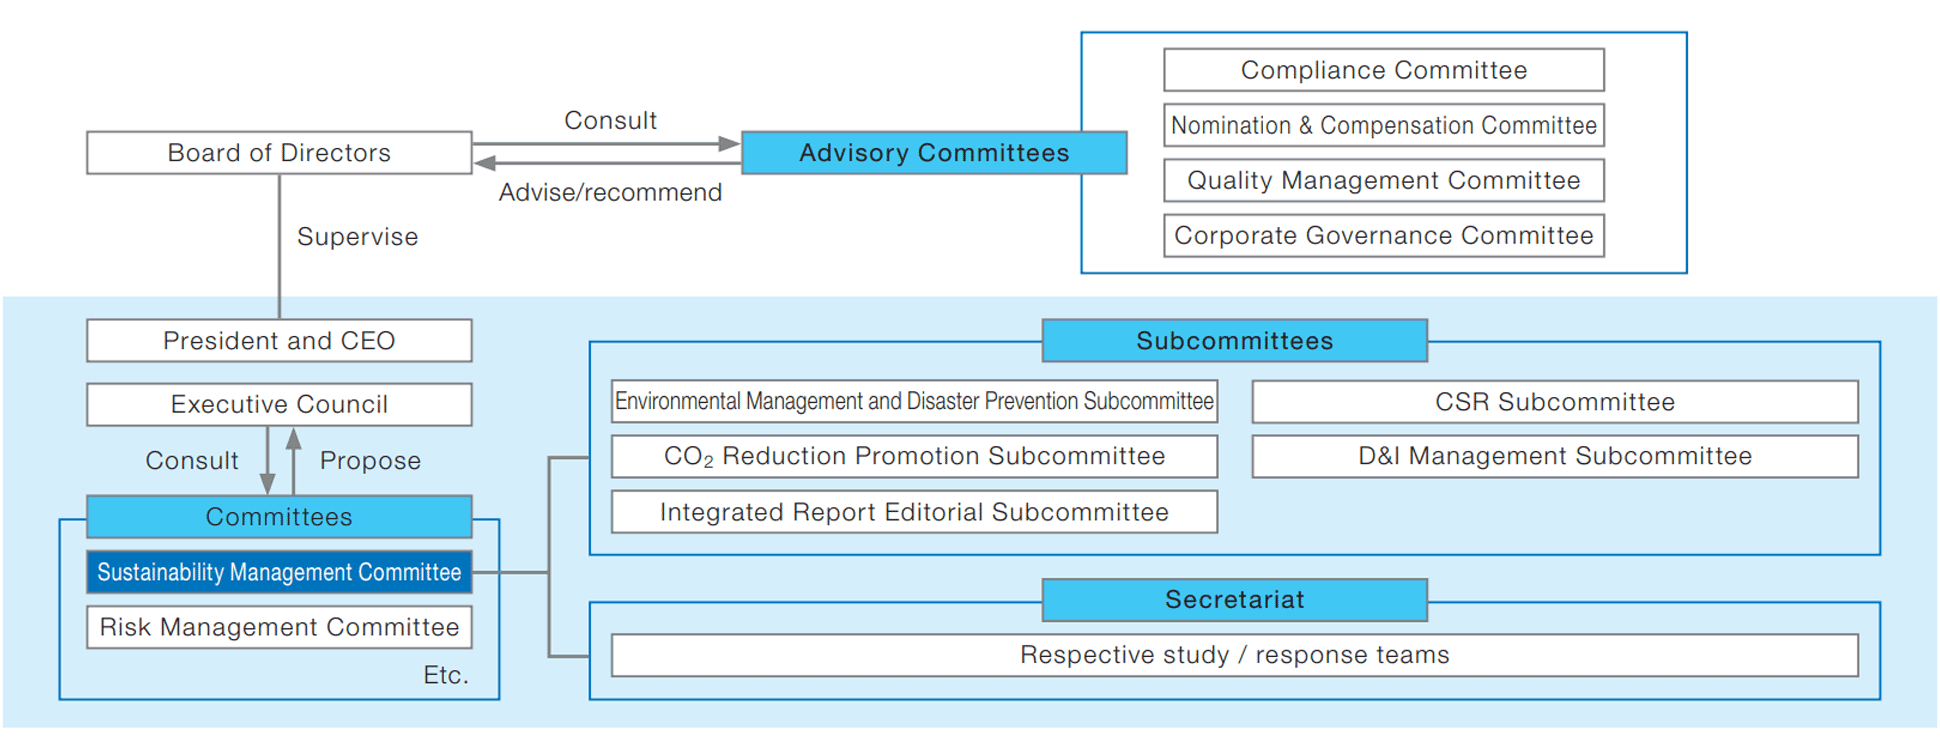 Organizational Relationship of the Sustainability Management Committee